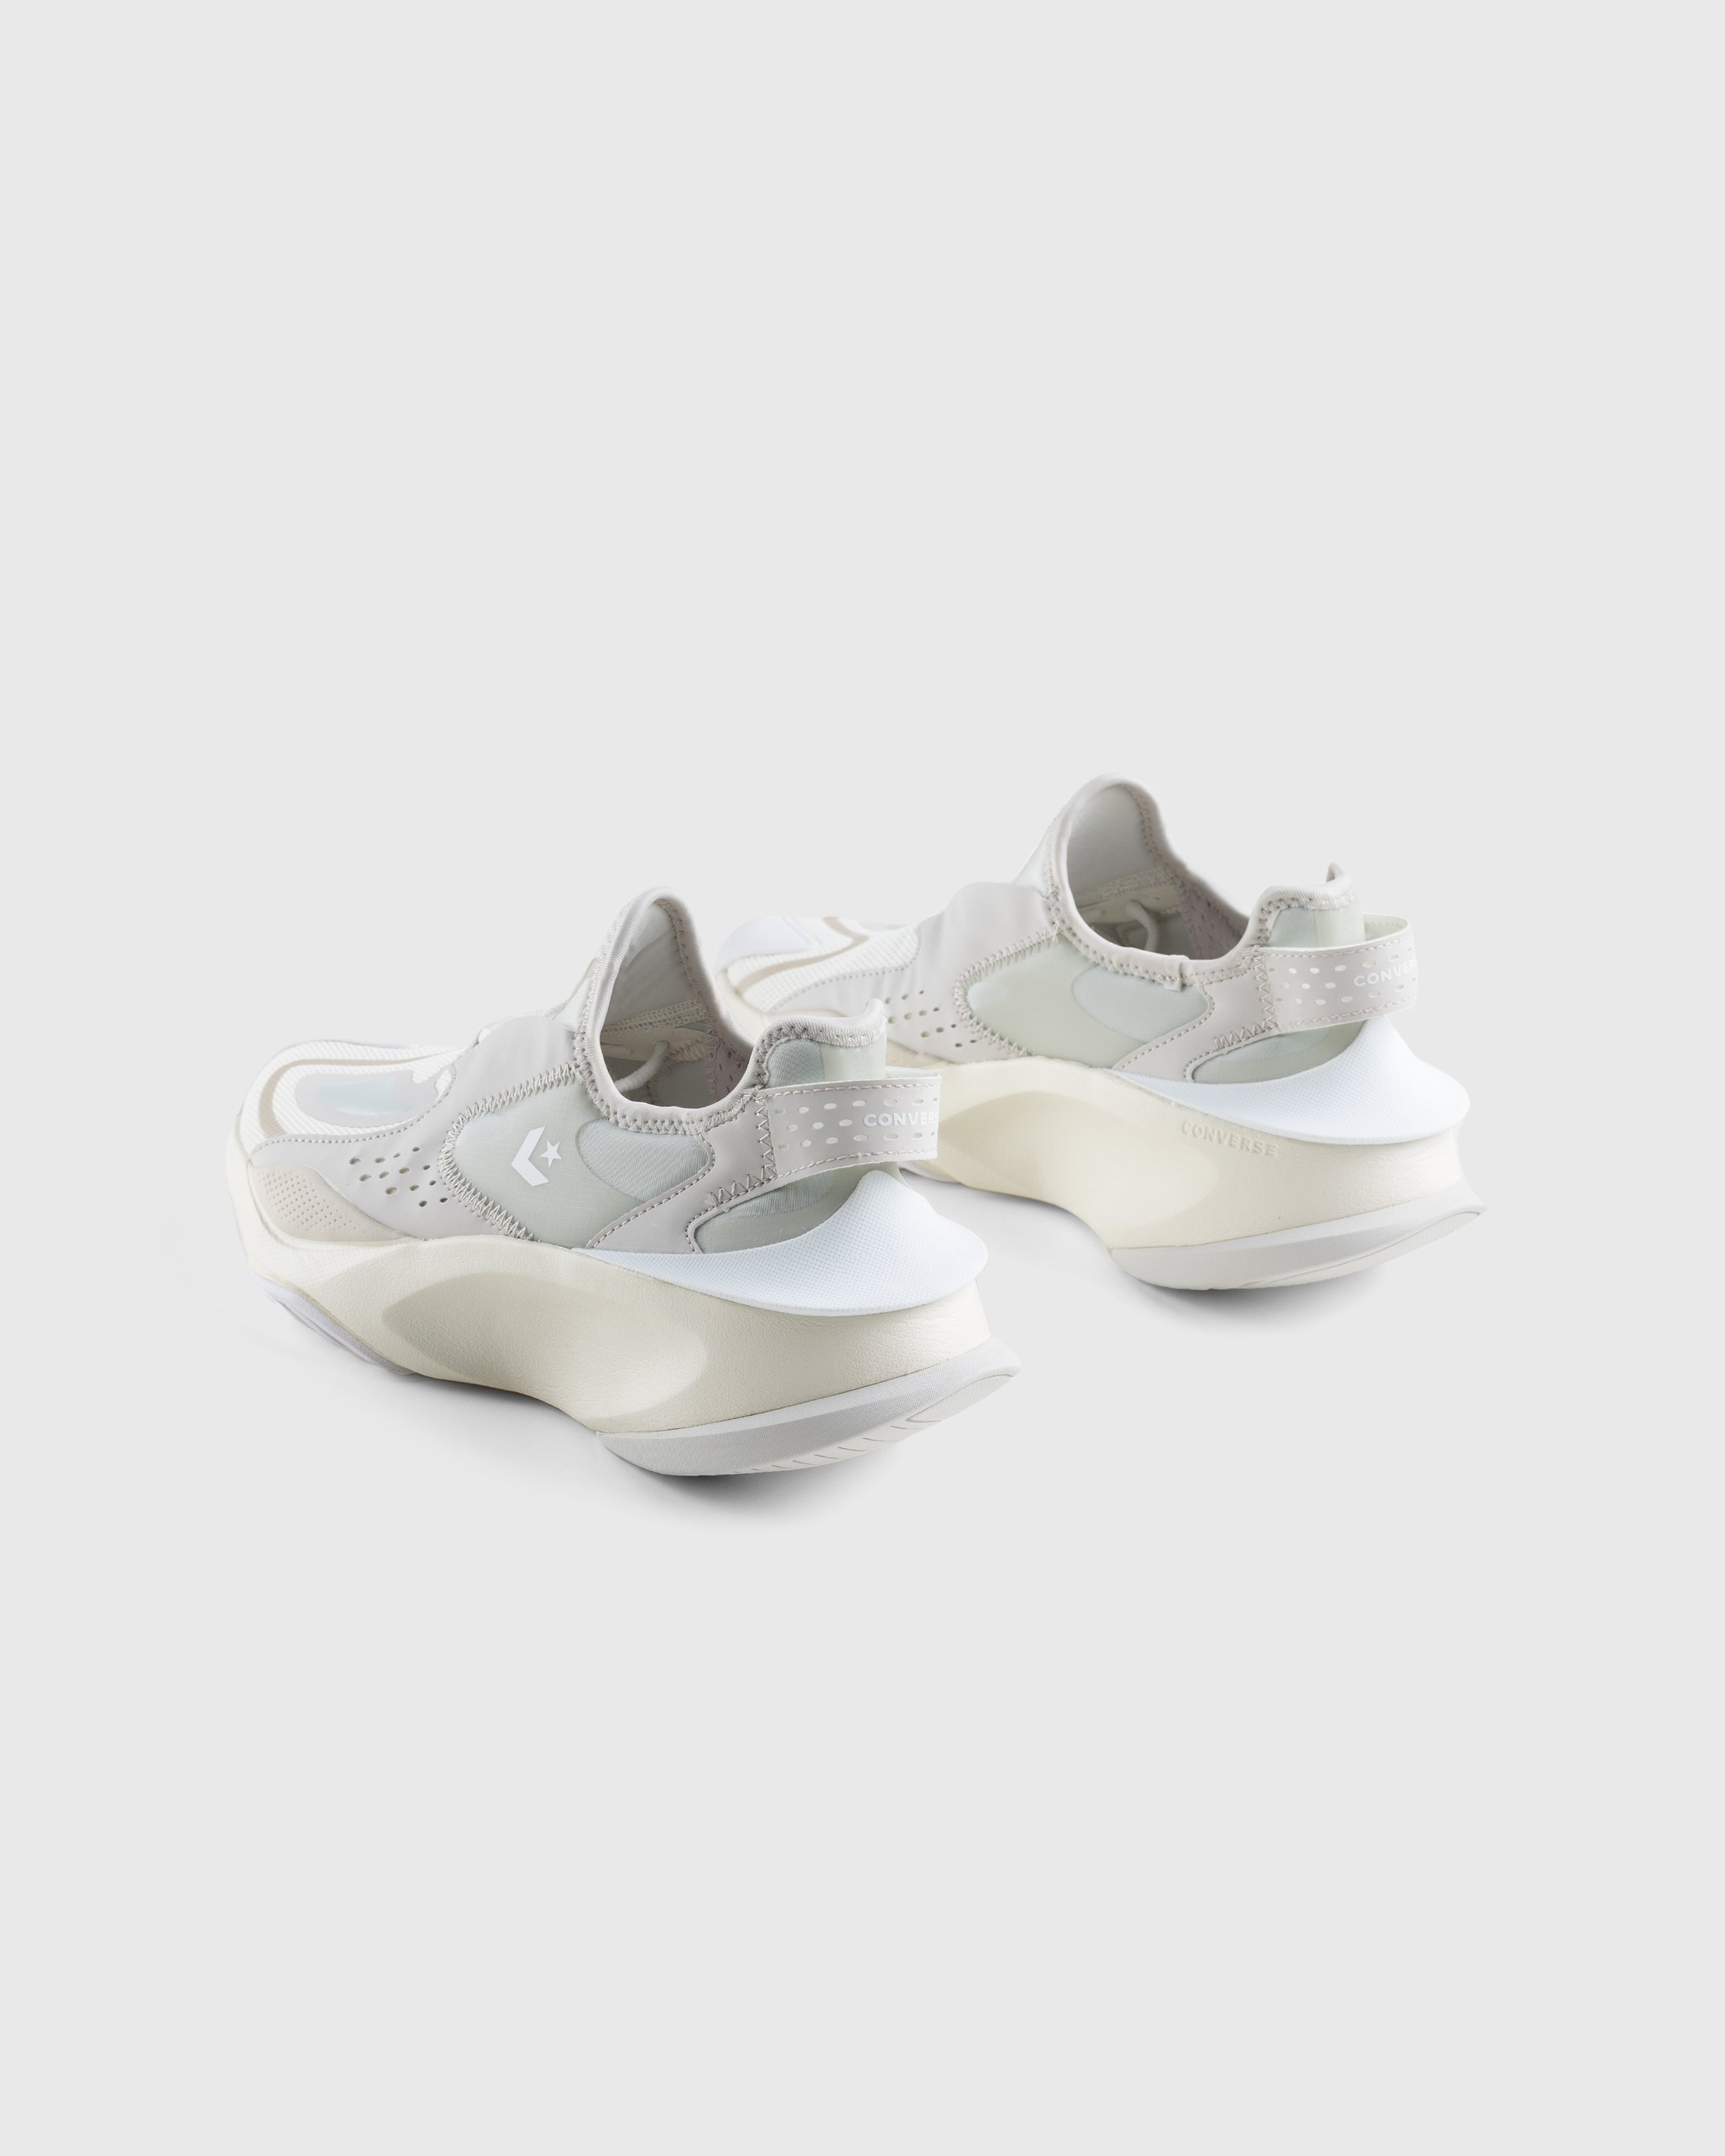 Converse – Aeon Active Cx Ox Egret/Pale Putty - Sneakers - White - Image 4